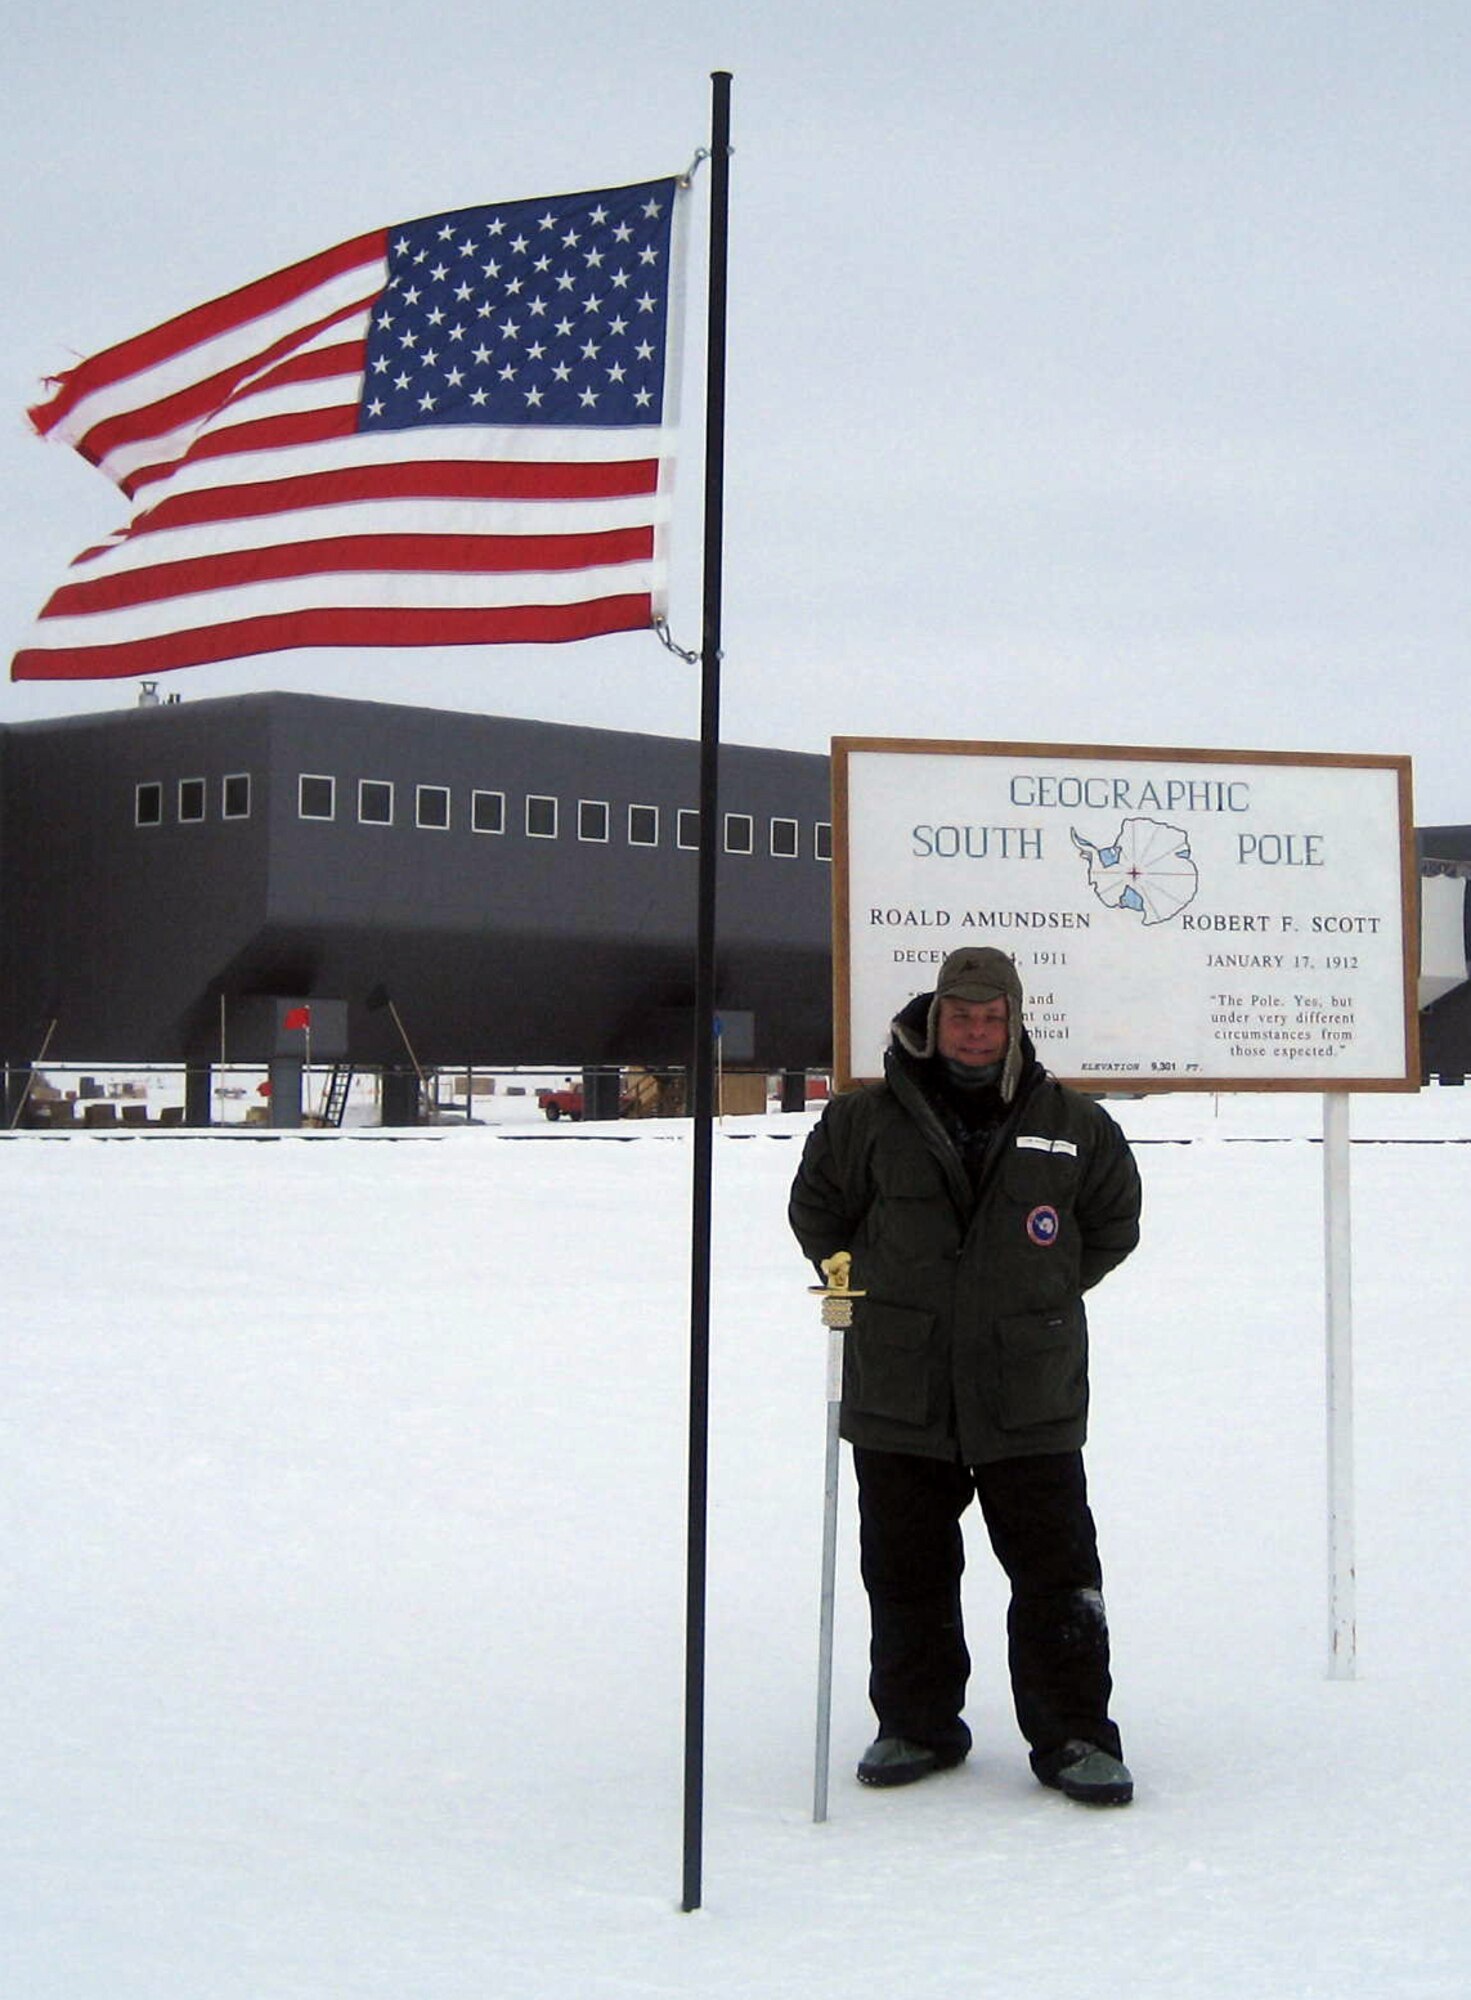 Cmdr. Scott Shackleton stands at the geographic South Pole during a brief visit to the remote location Feb. 9.  Commander Shackleton – a distant relative of the famous Antarctic explorer Sir Ernest Shackleton – is a Navy reservist assigned to MSC who just finished a tour supporting Operation Deep Freeze.  The operation is the Department of Defense’s logistical support to the National Science Foundation and U.S. Antarctica Program activities in Antarctica. (Courtesy photo)